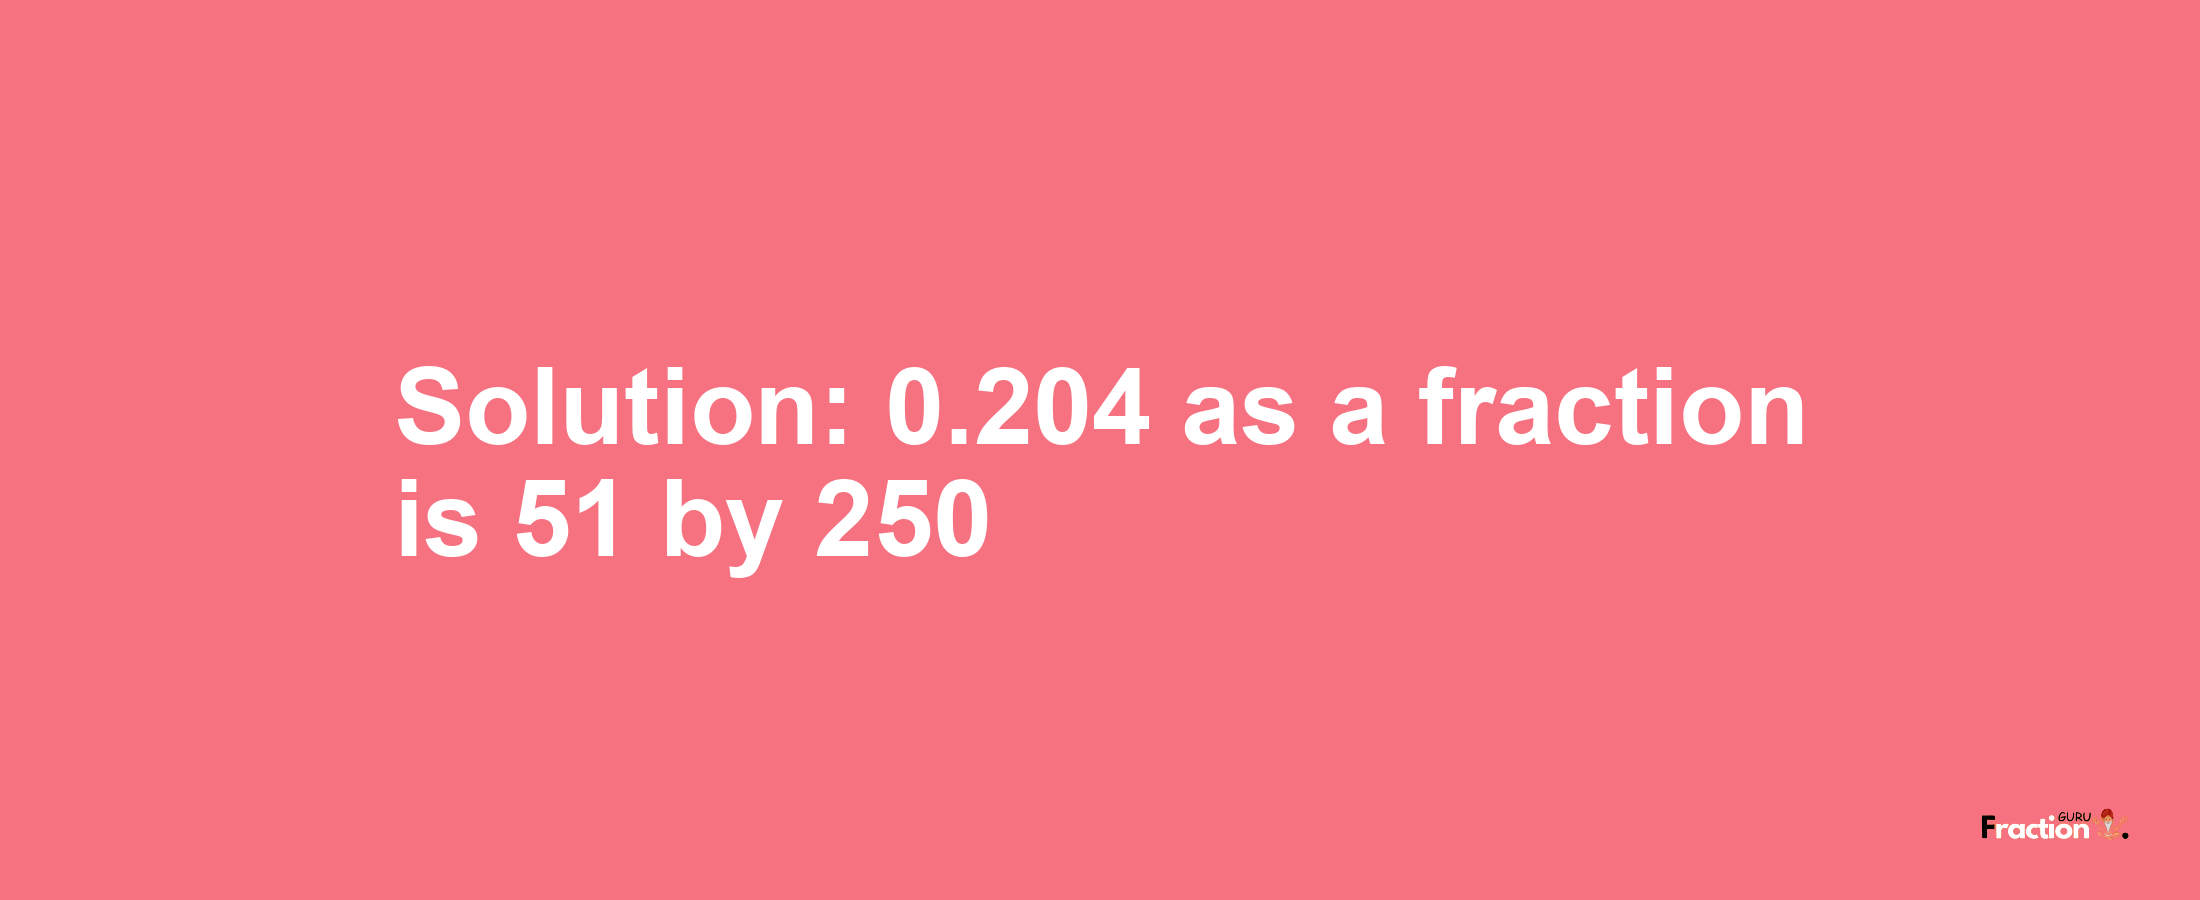 Solution:0.204 as a fraction is 51/250